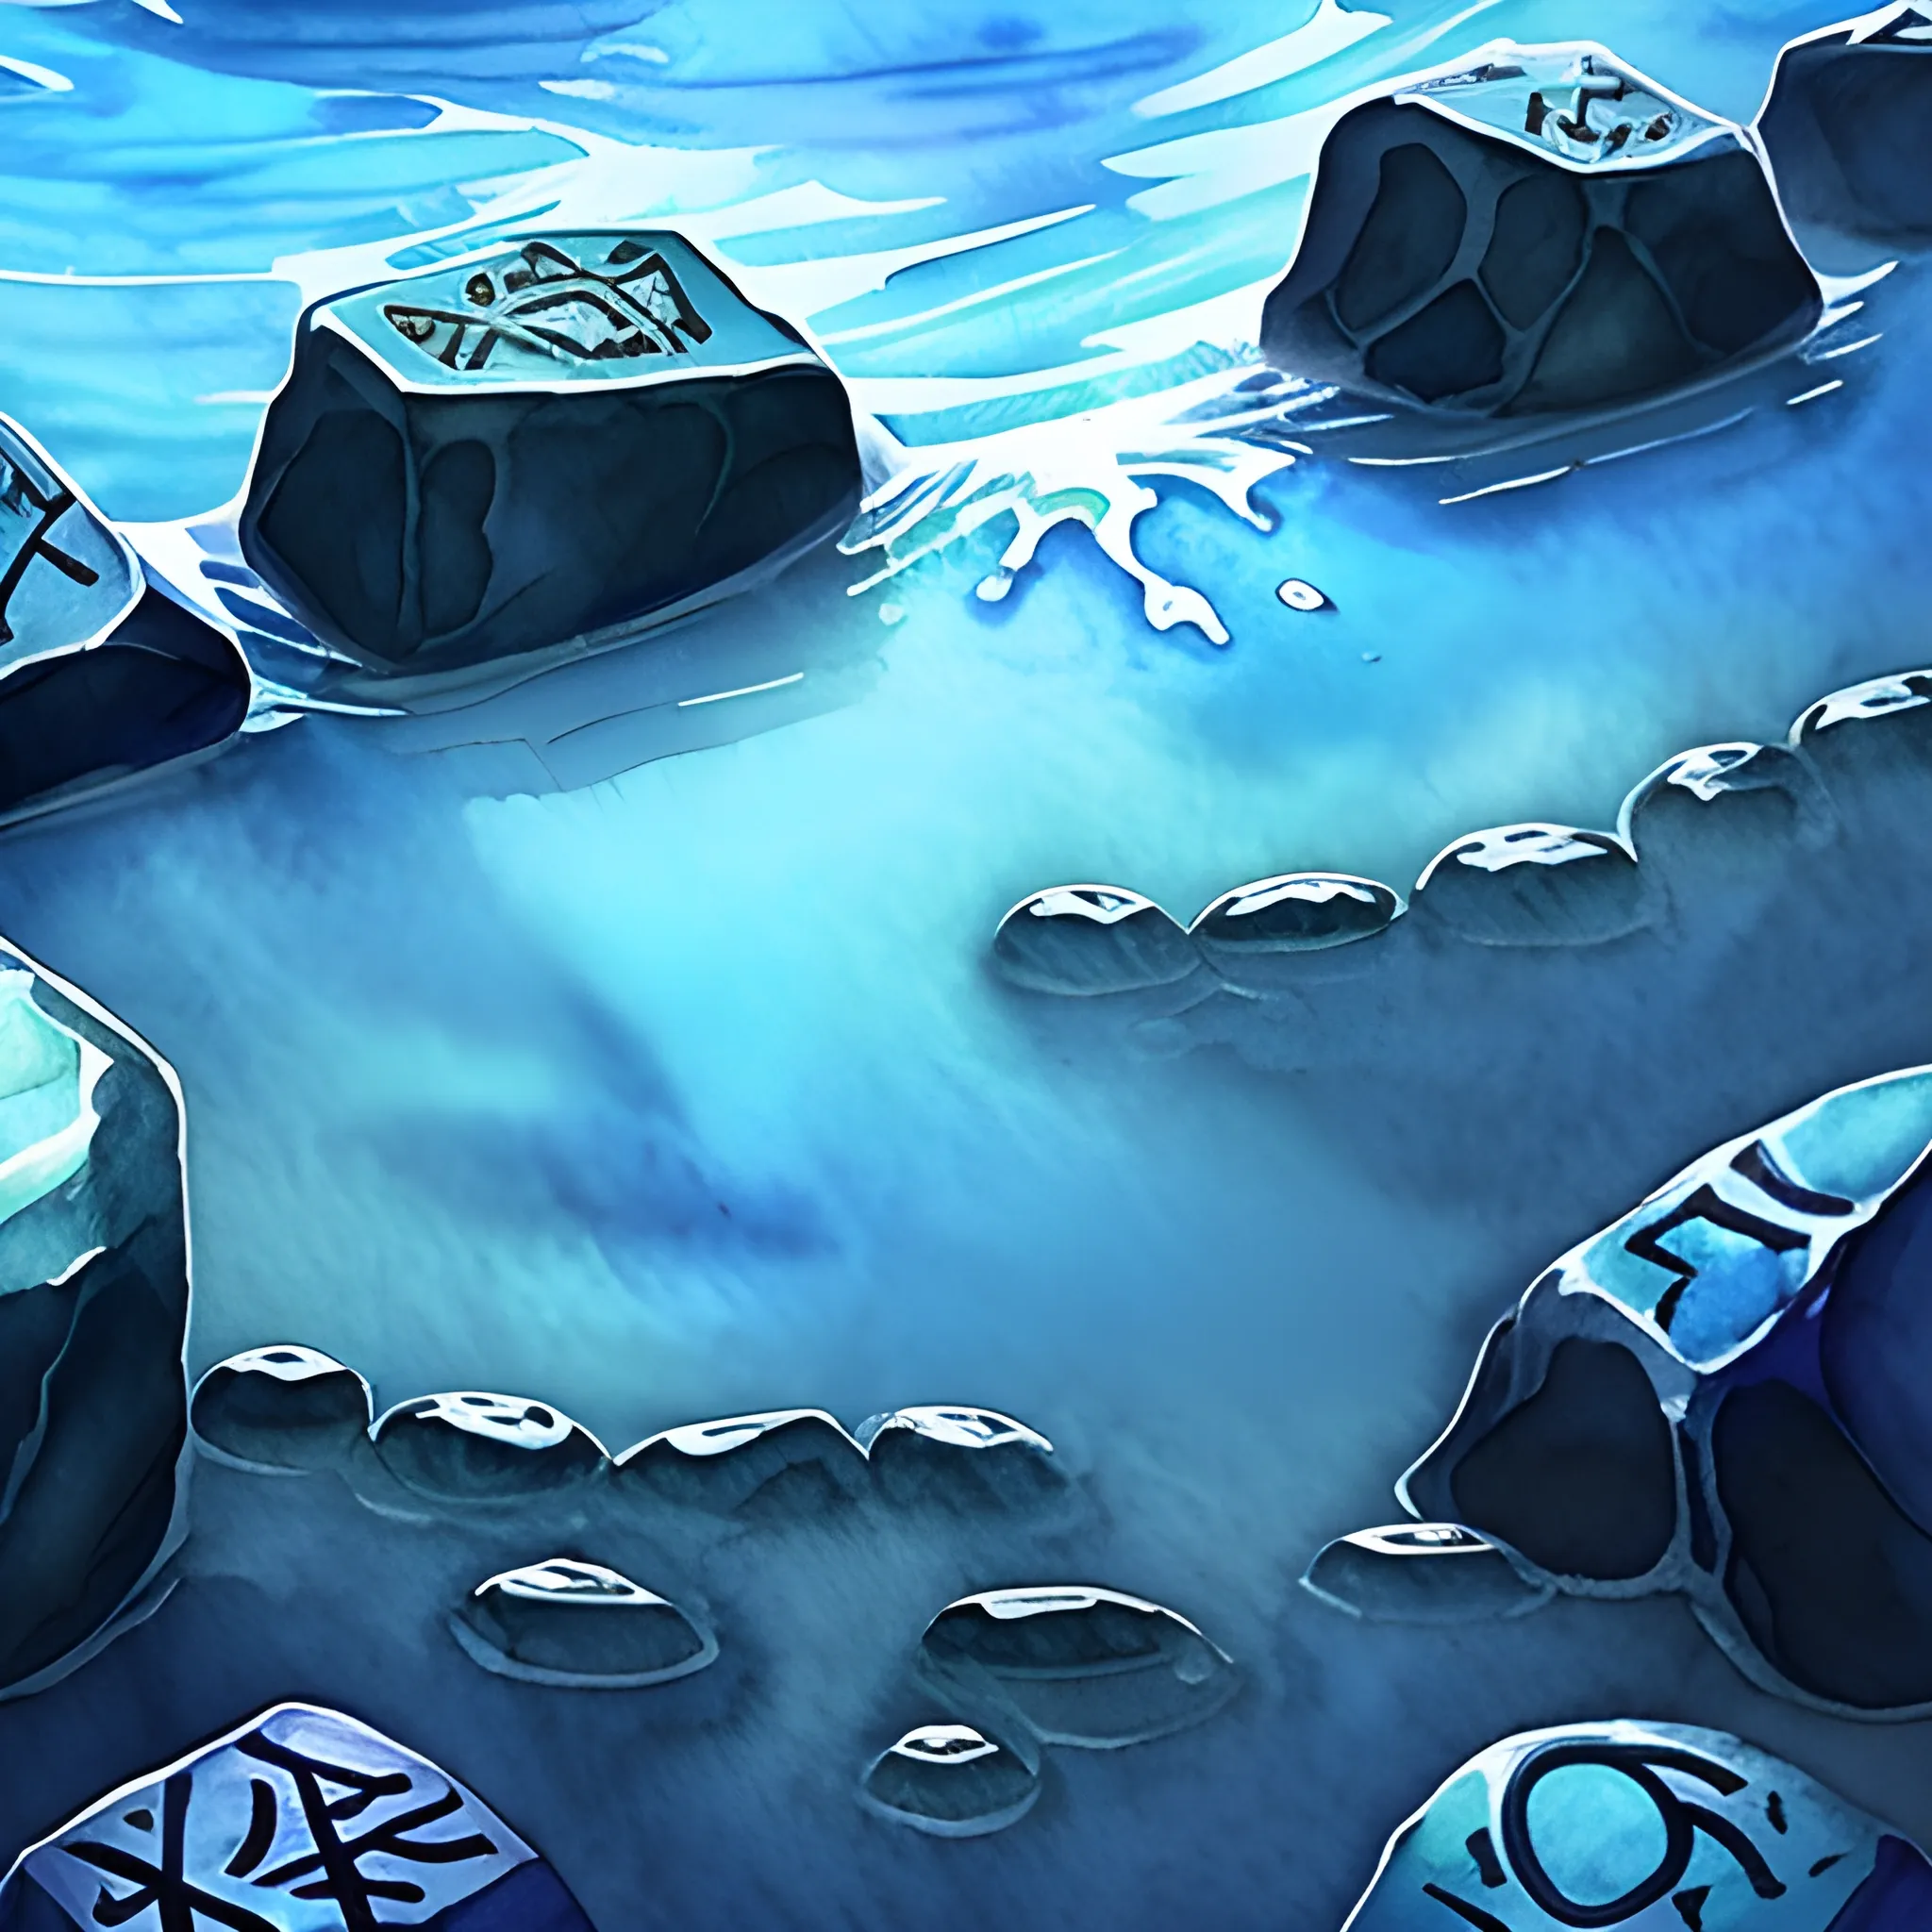 , Trippy, Water Color, abyssal water, dark blue, runic stones,
realistic water background